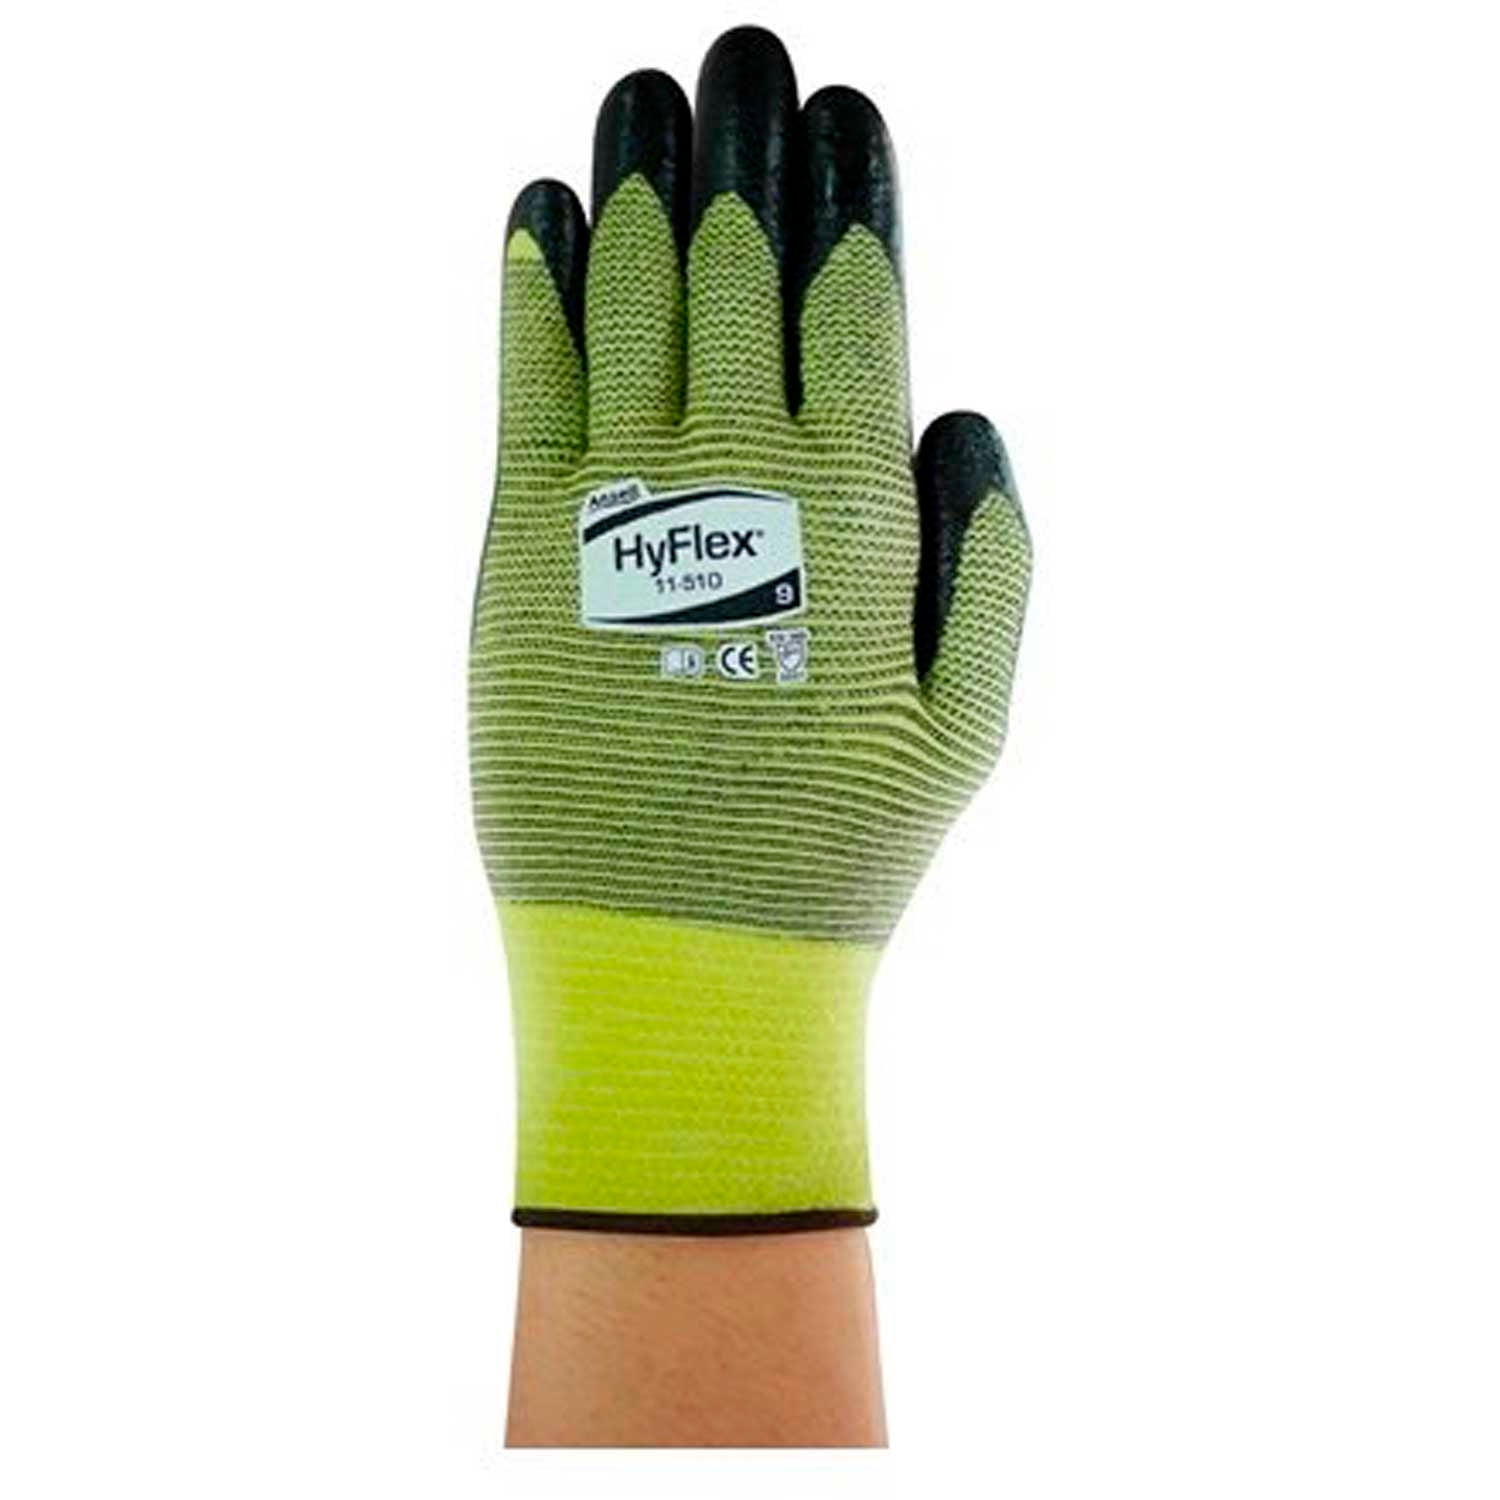 ANSELL LO-VOL GOAT Hyflex Electrical Glove Protector,Gray,Size 8,PR 